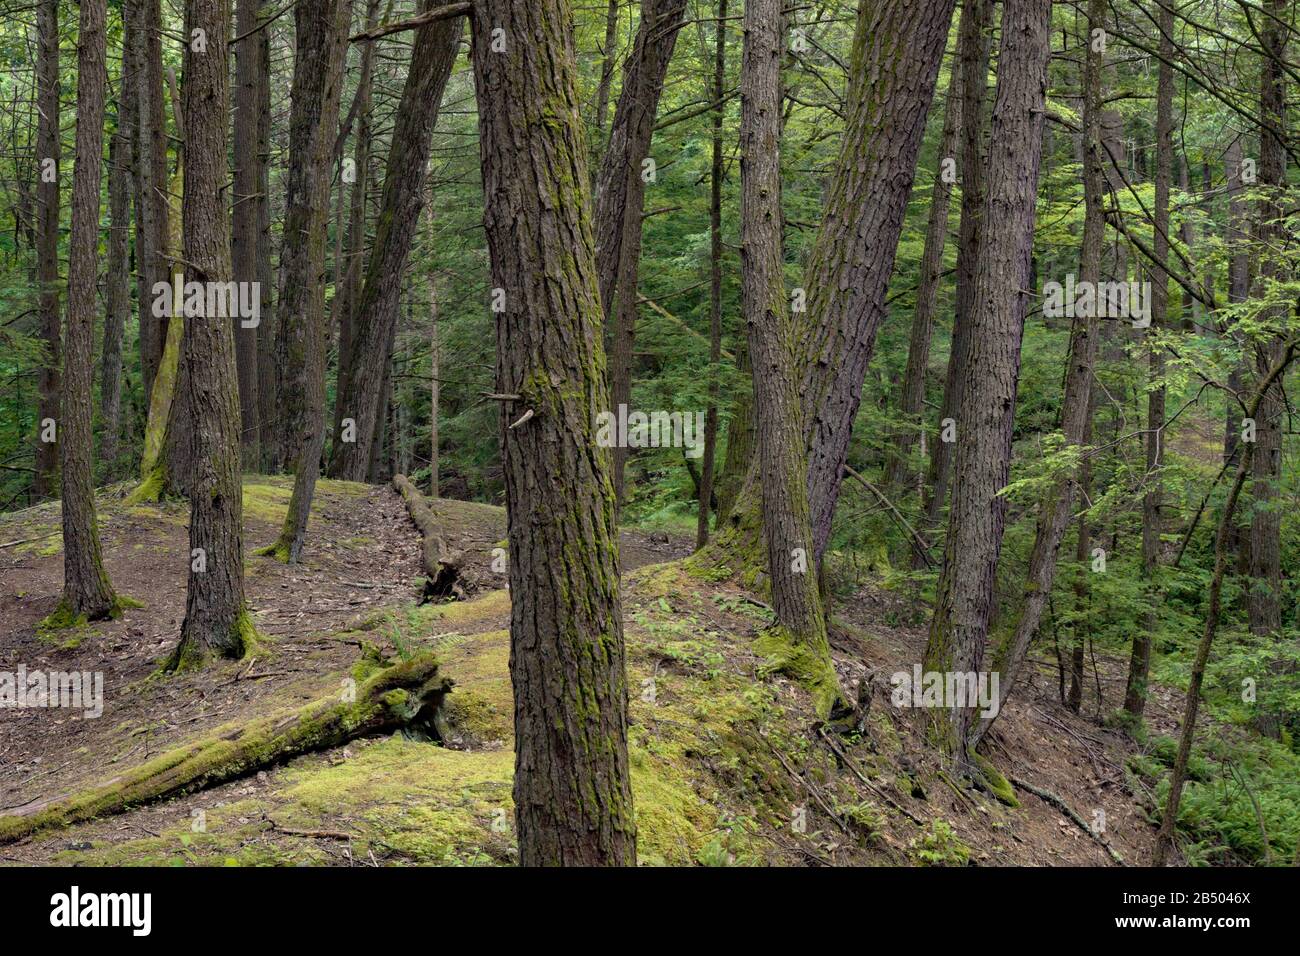 The hemlock ravine forest could be one of the most endangered ecosystem in eastern North America due to the non-native hemlock woolly adelgid (Adelges Stock Photo